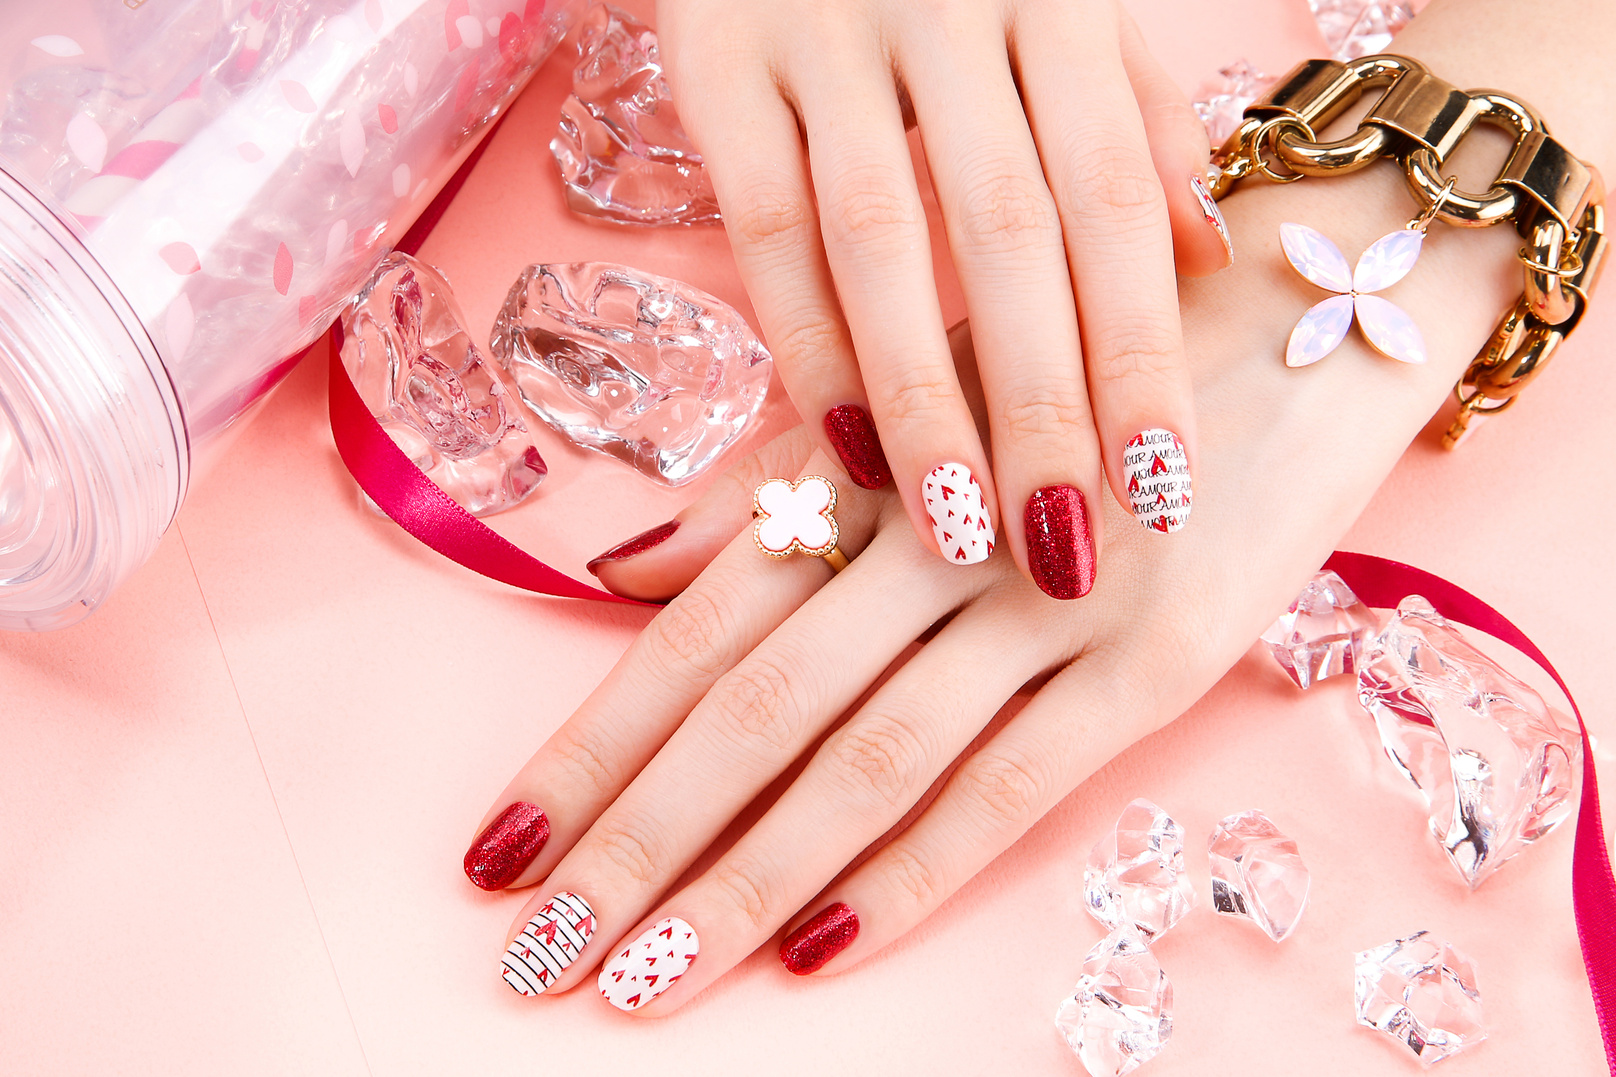 a person's hands with red and white manicured nails on pink background